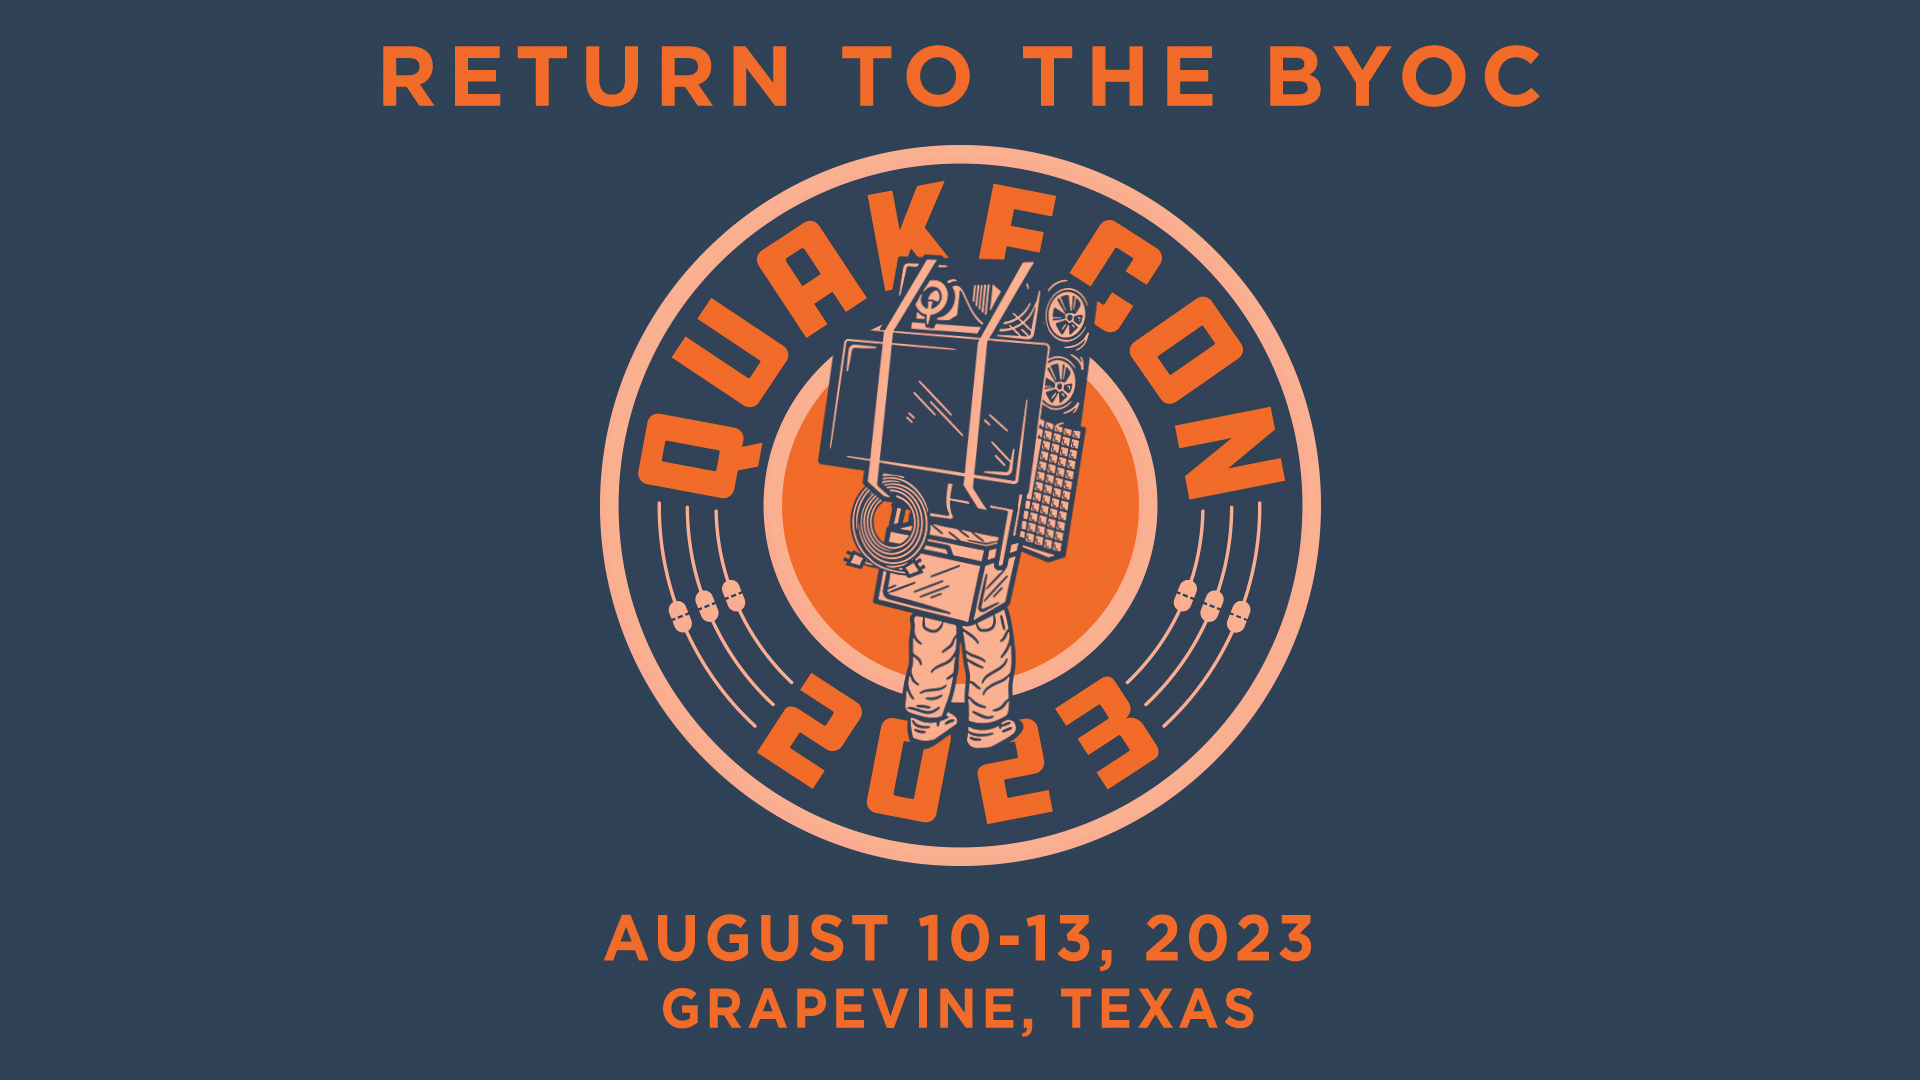 Return to the BYOC. August 10-13, Grapevine, Texas